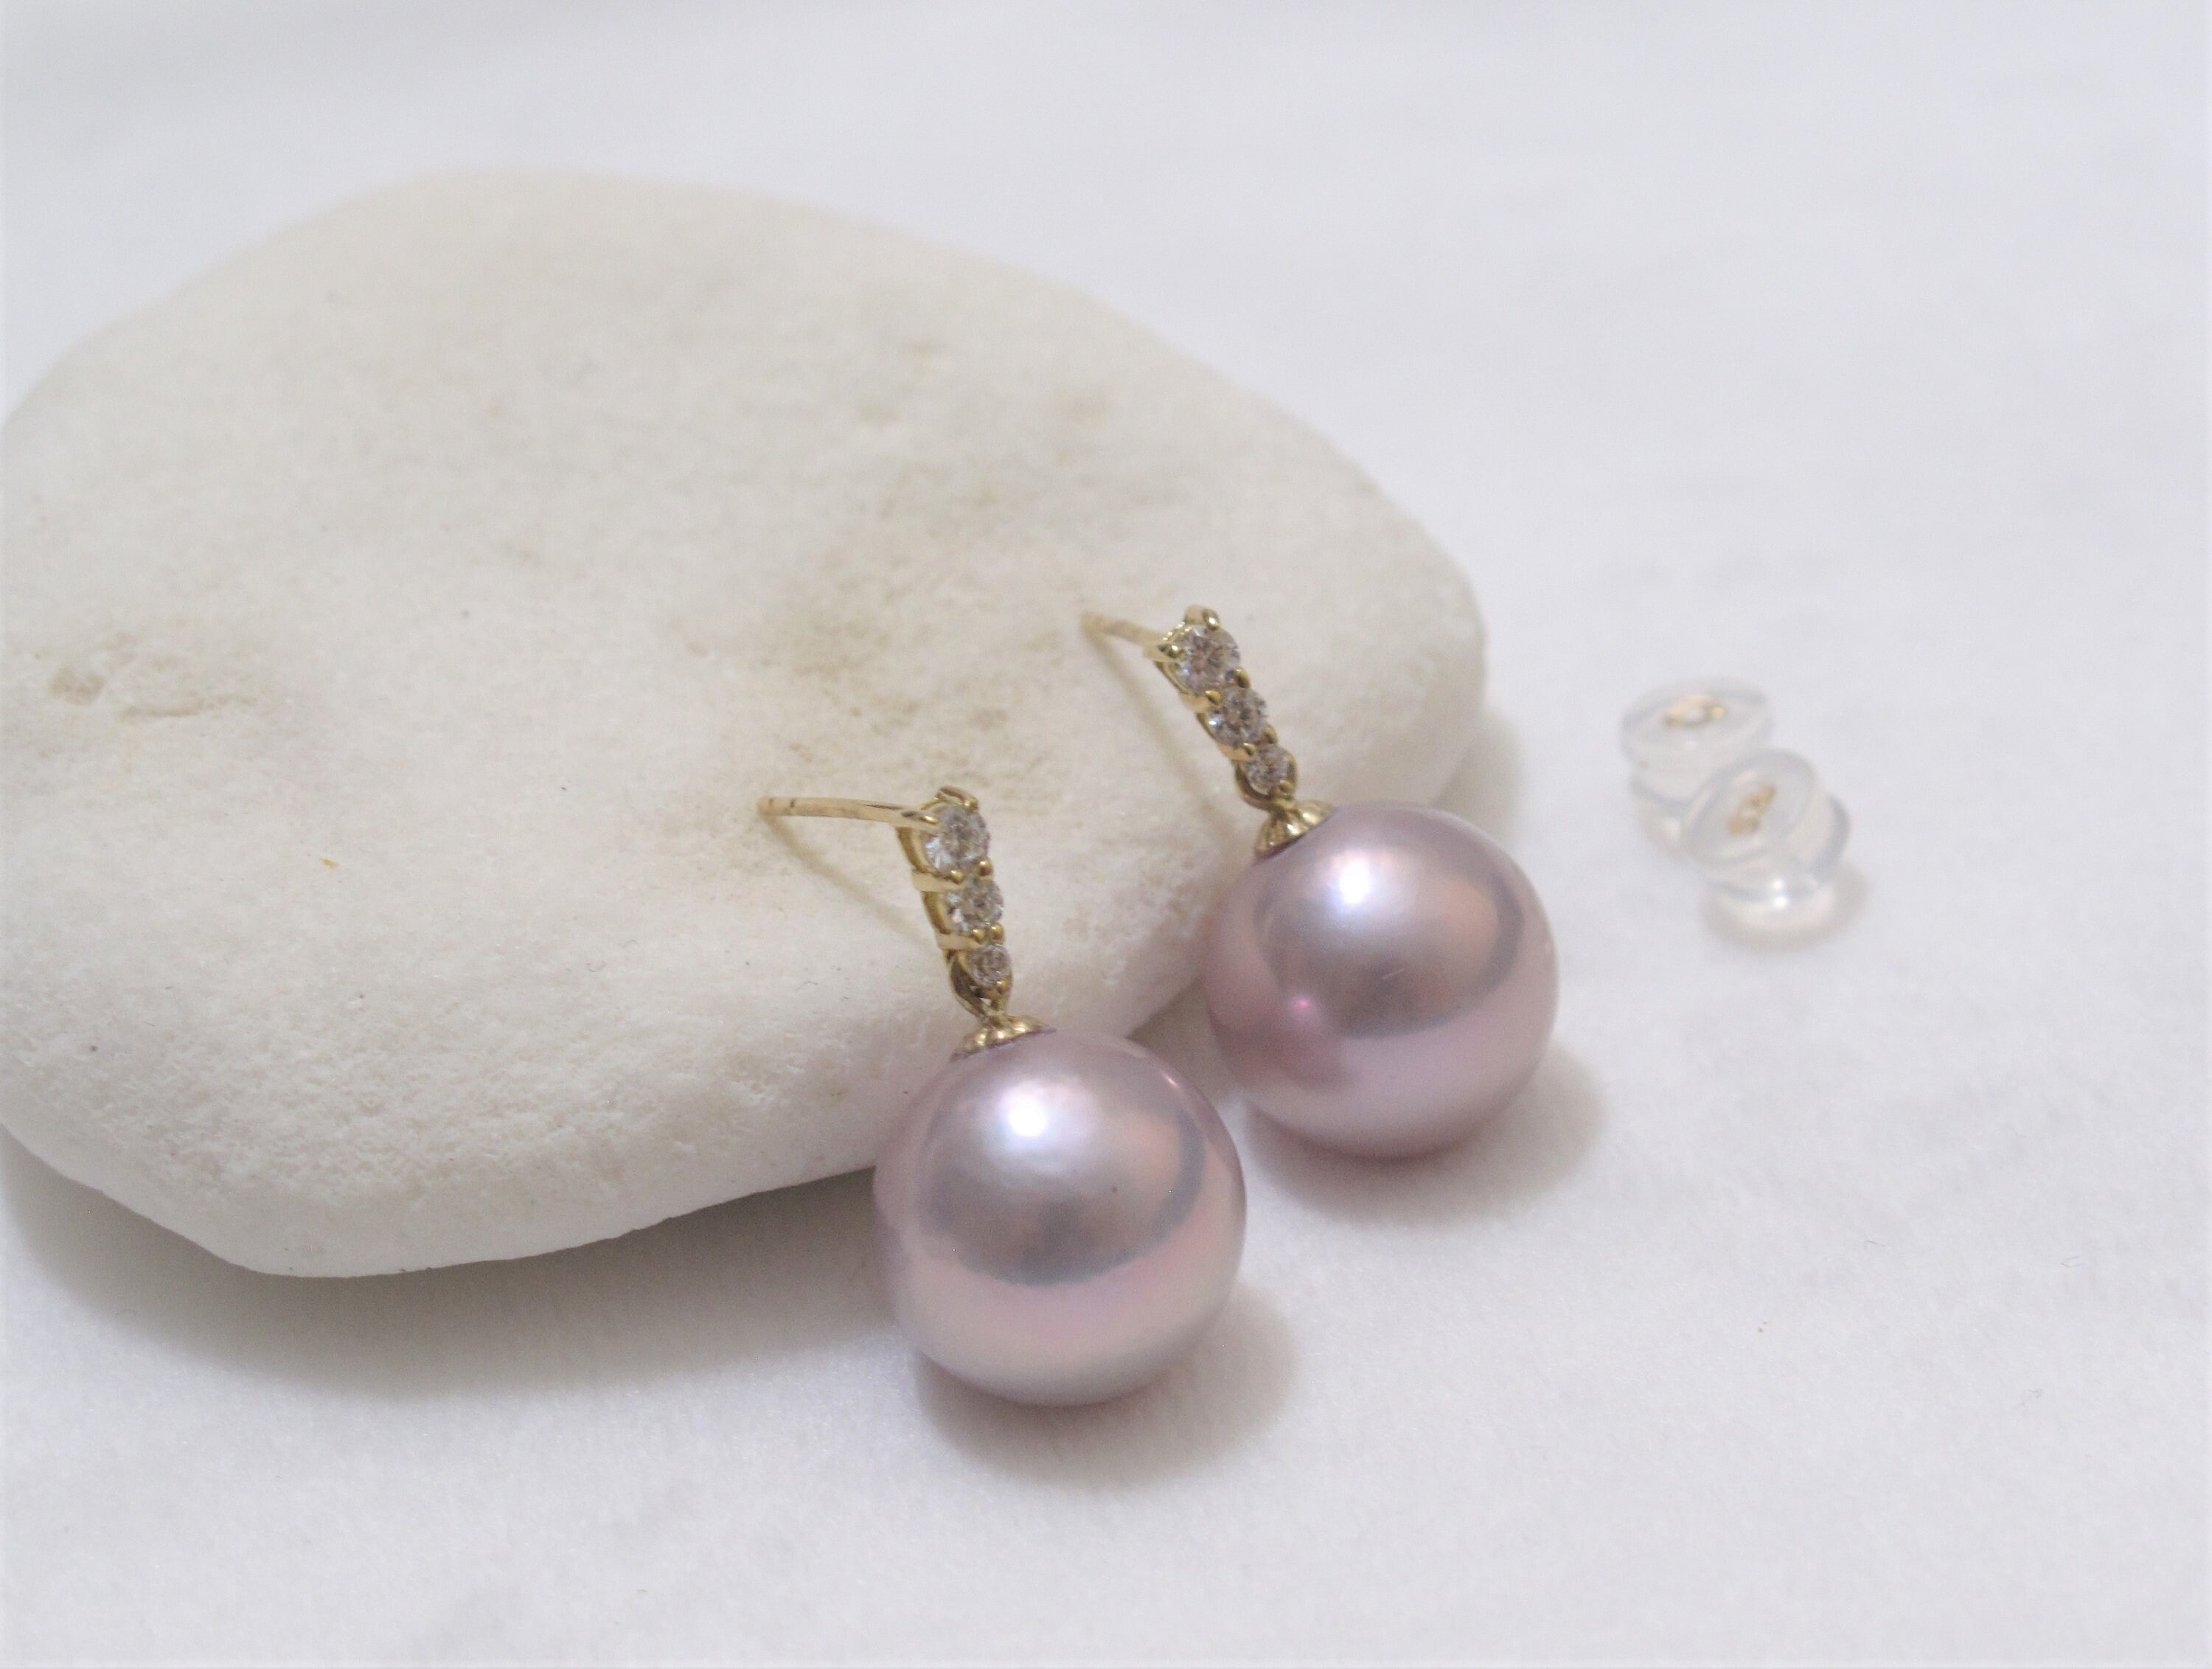 11-12mm Natural Lavender Pinkedisonpearlearrings W/czs in 925 - Etsy